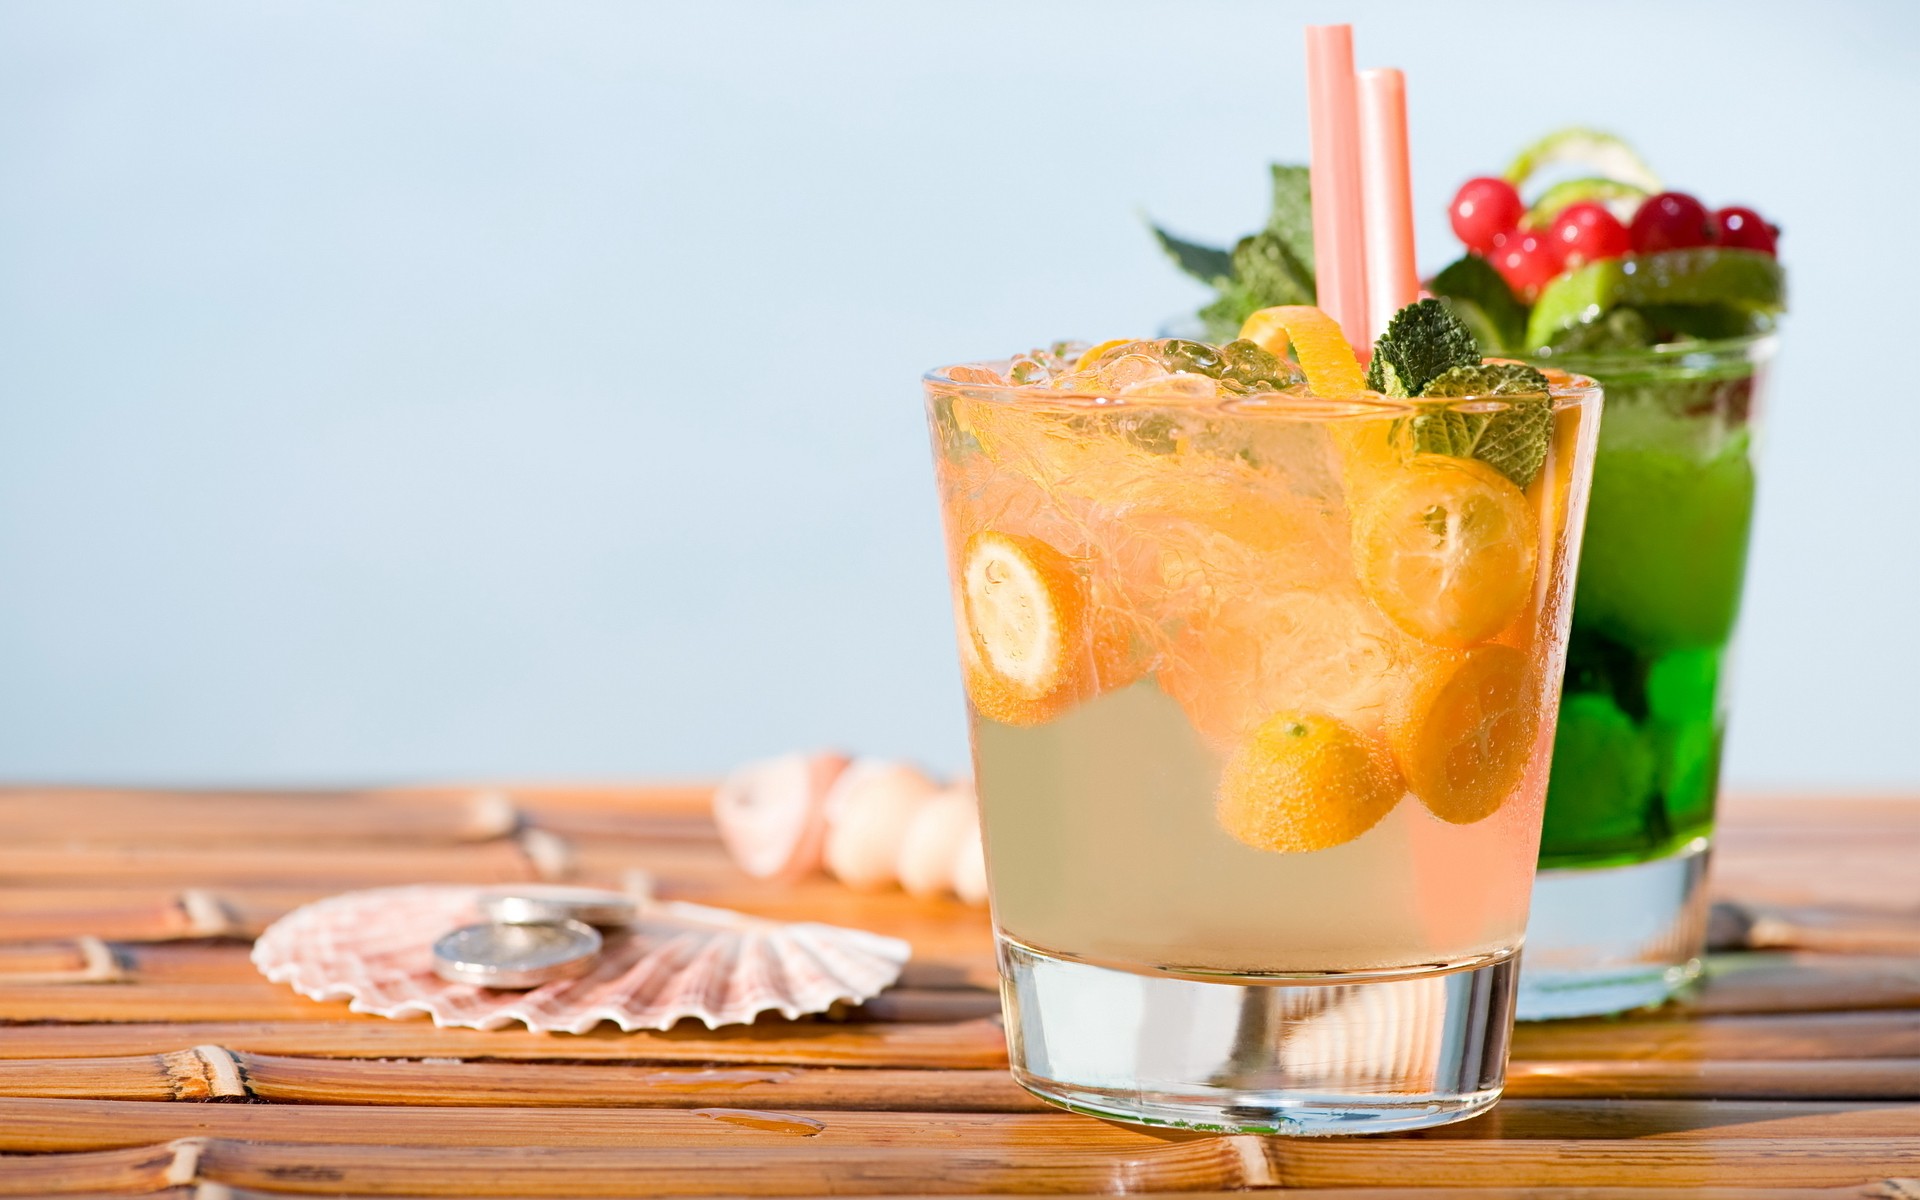 Fresh Drink Picture - High Resolution Cocktail Images Hd - HD Wallpaper 